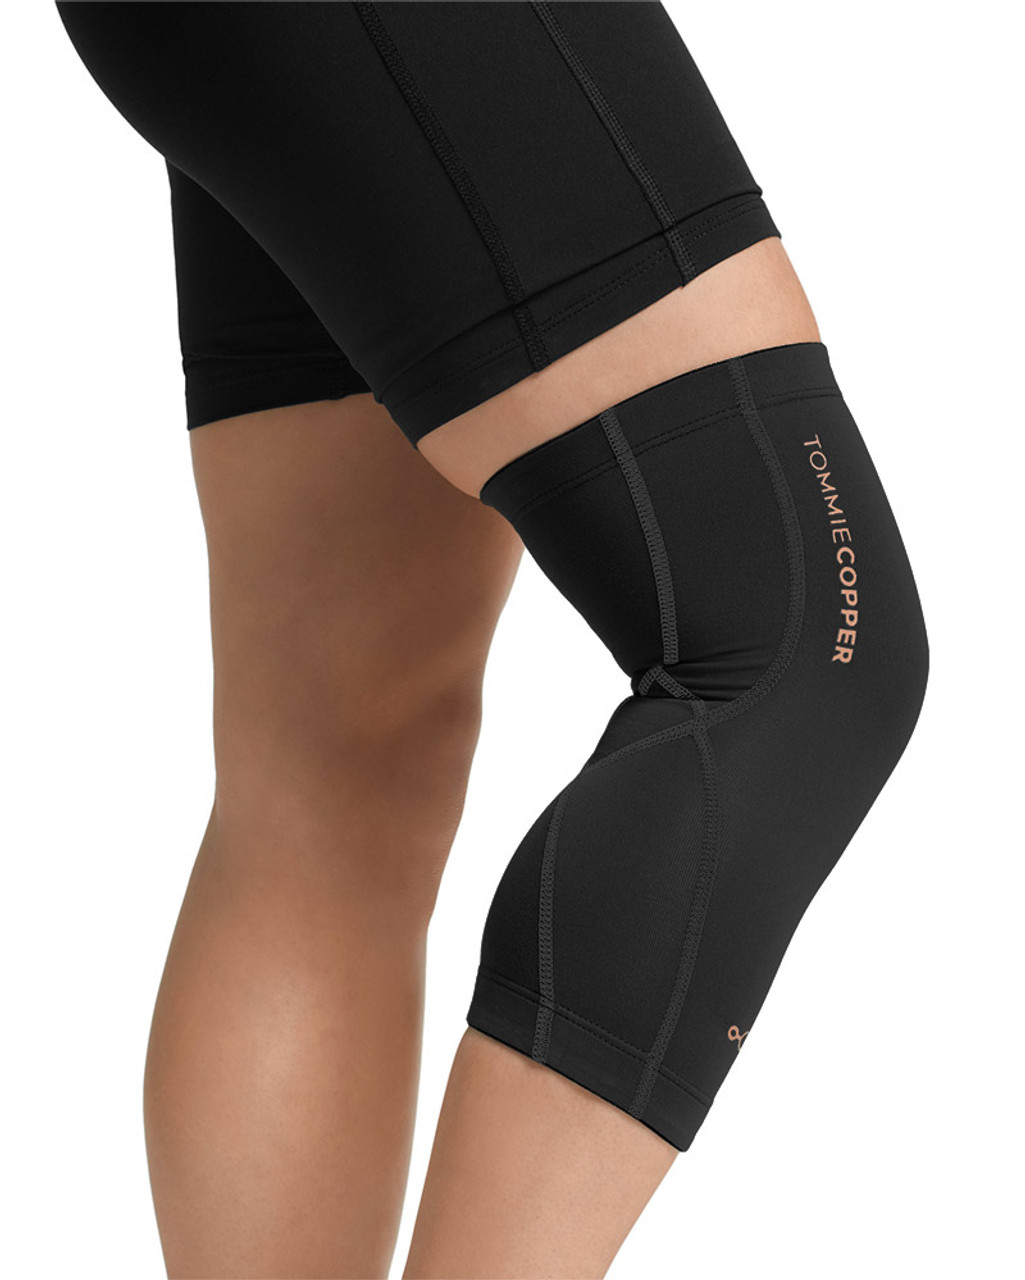 Best Buy: Tommie Copper Unisex Compression Infrared Knee Sleeve